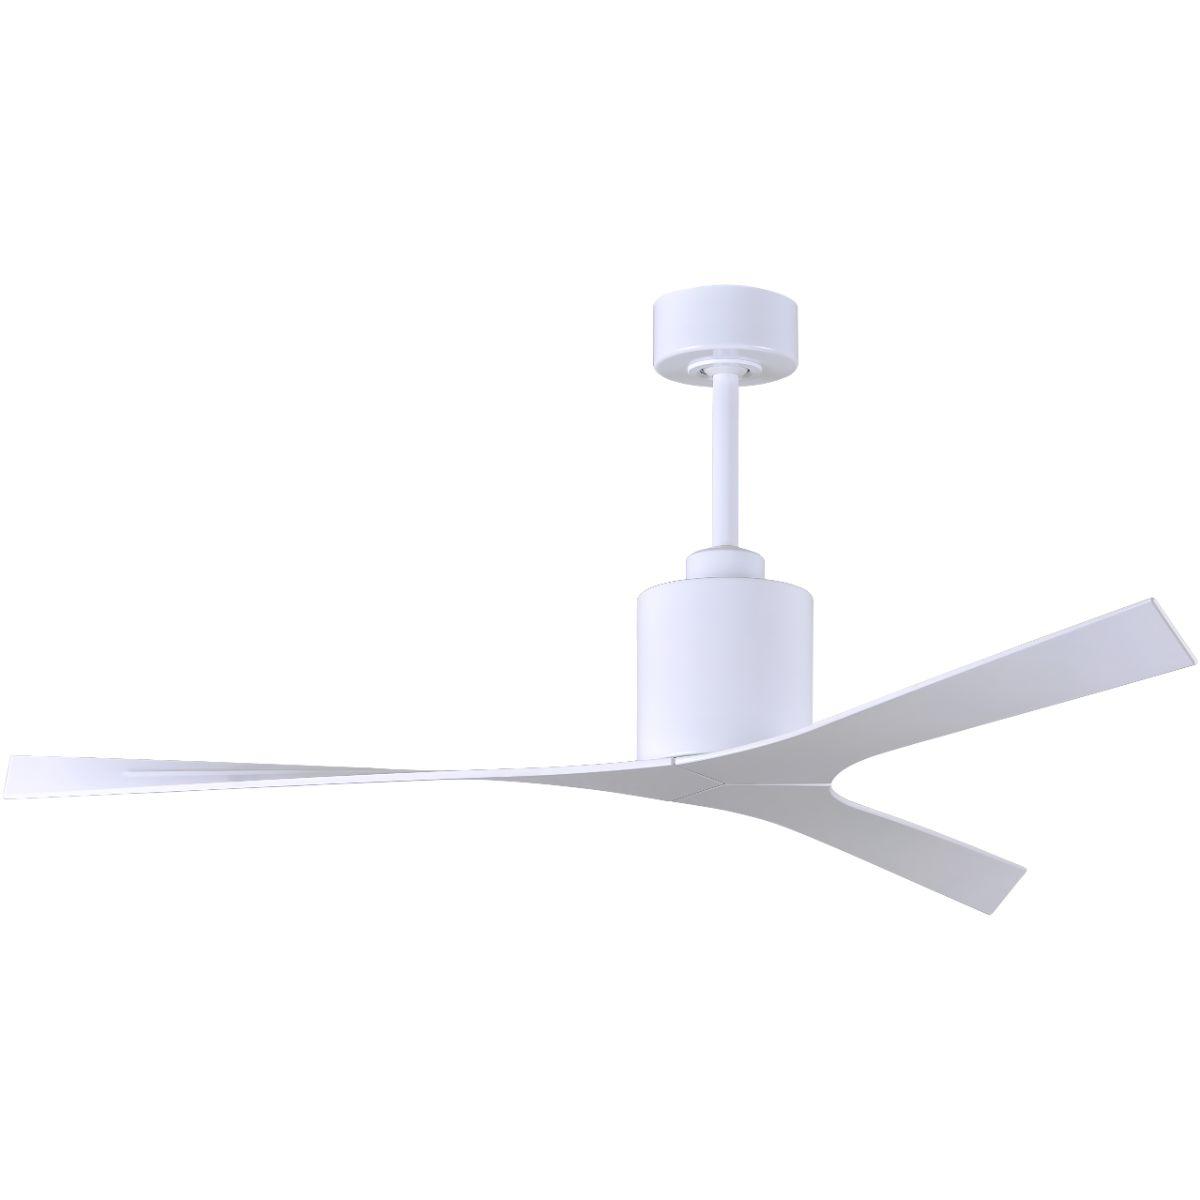 Molly 56 Inch Propeller Outdoor Ceiling Fan With Remote/Wall Control, Gloss White Finish